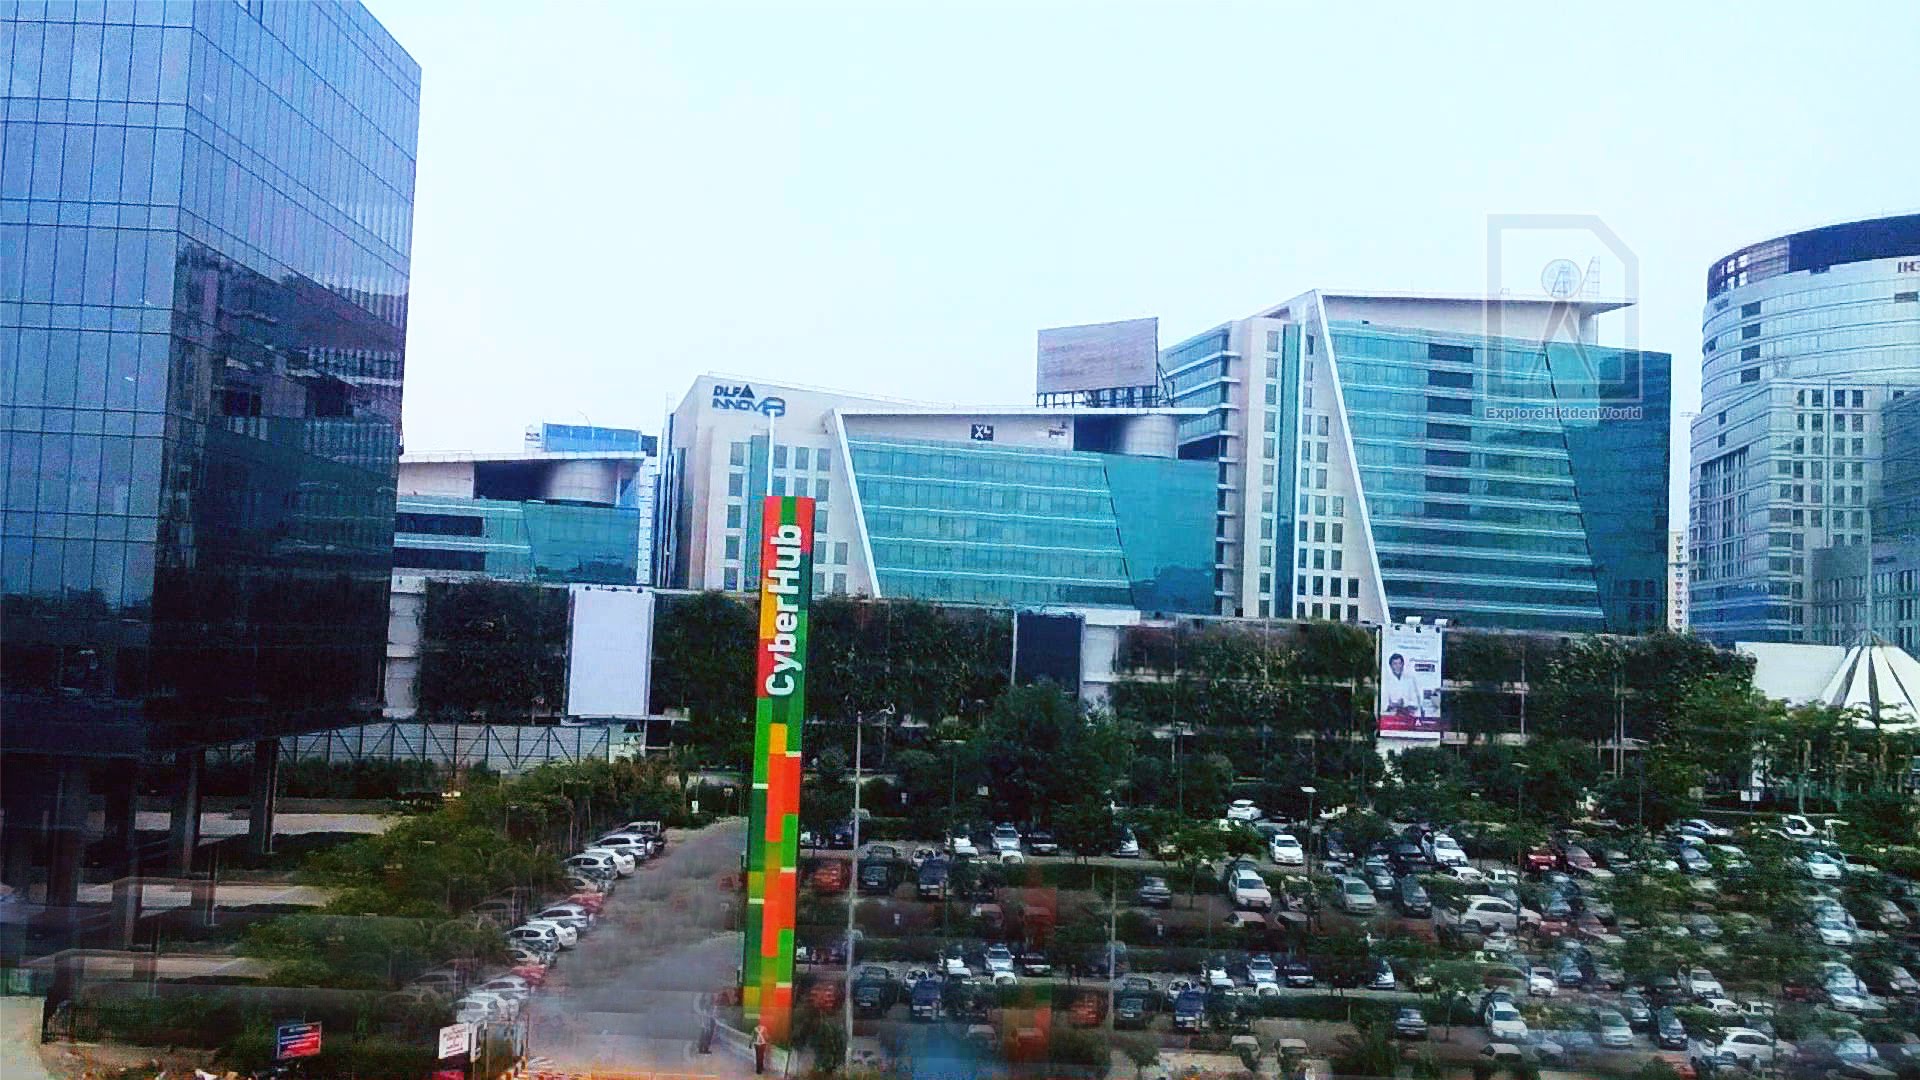 Cyber City View from Gurgaon Rapid Metro, India - YouTube